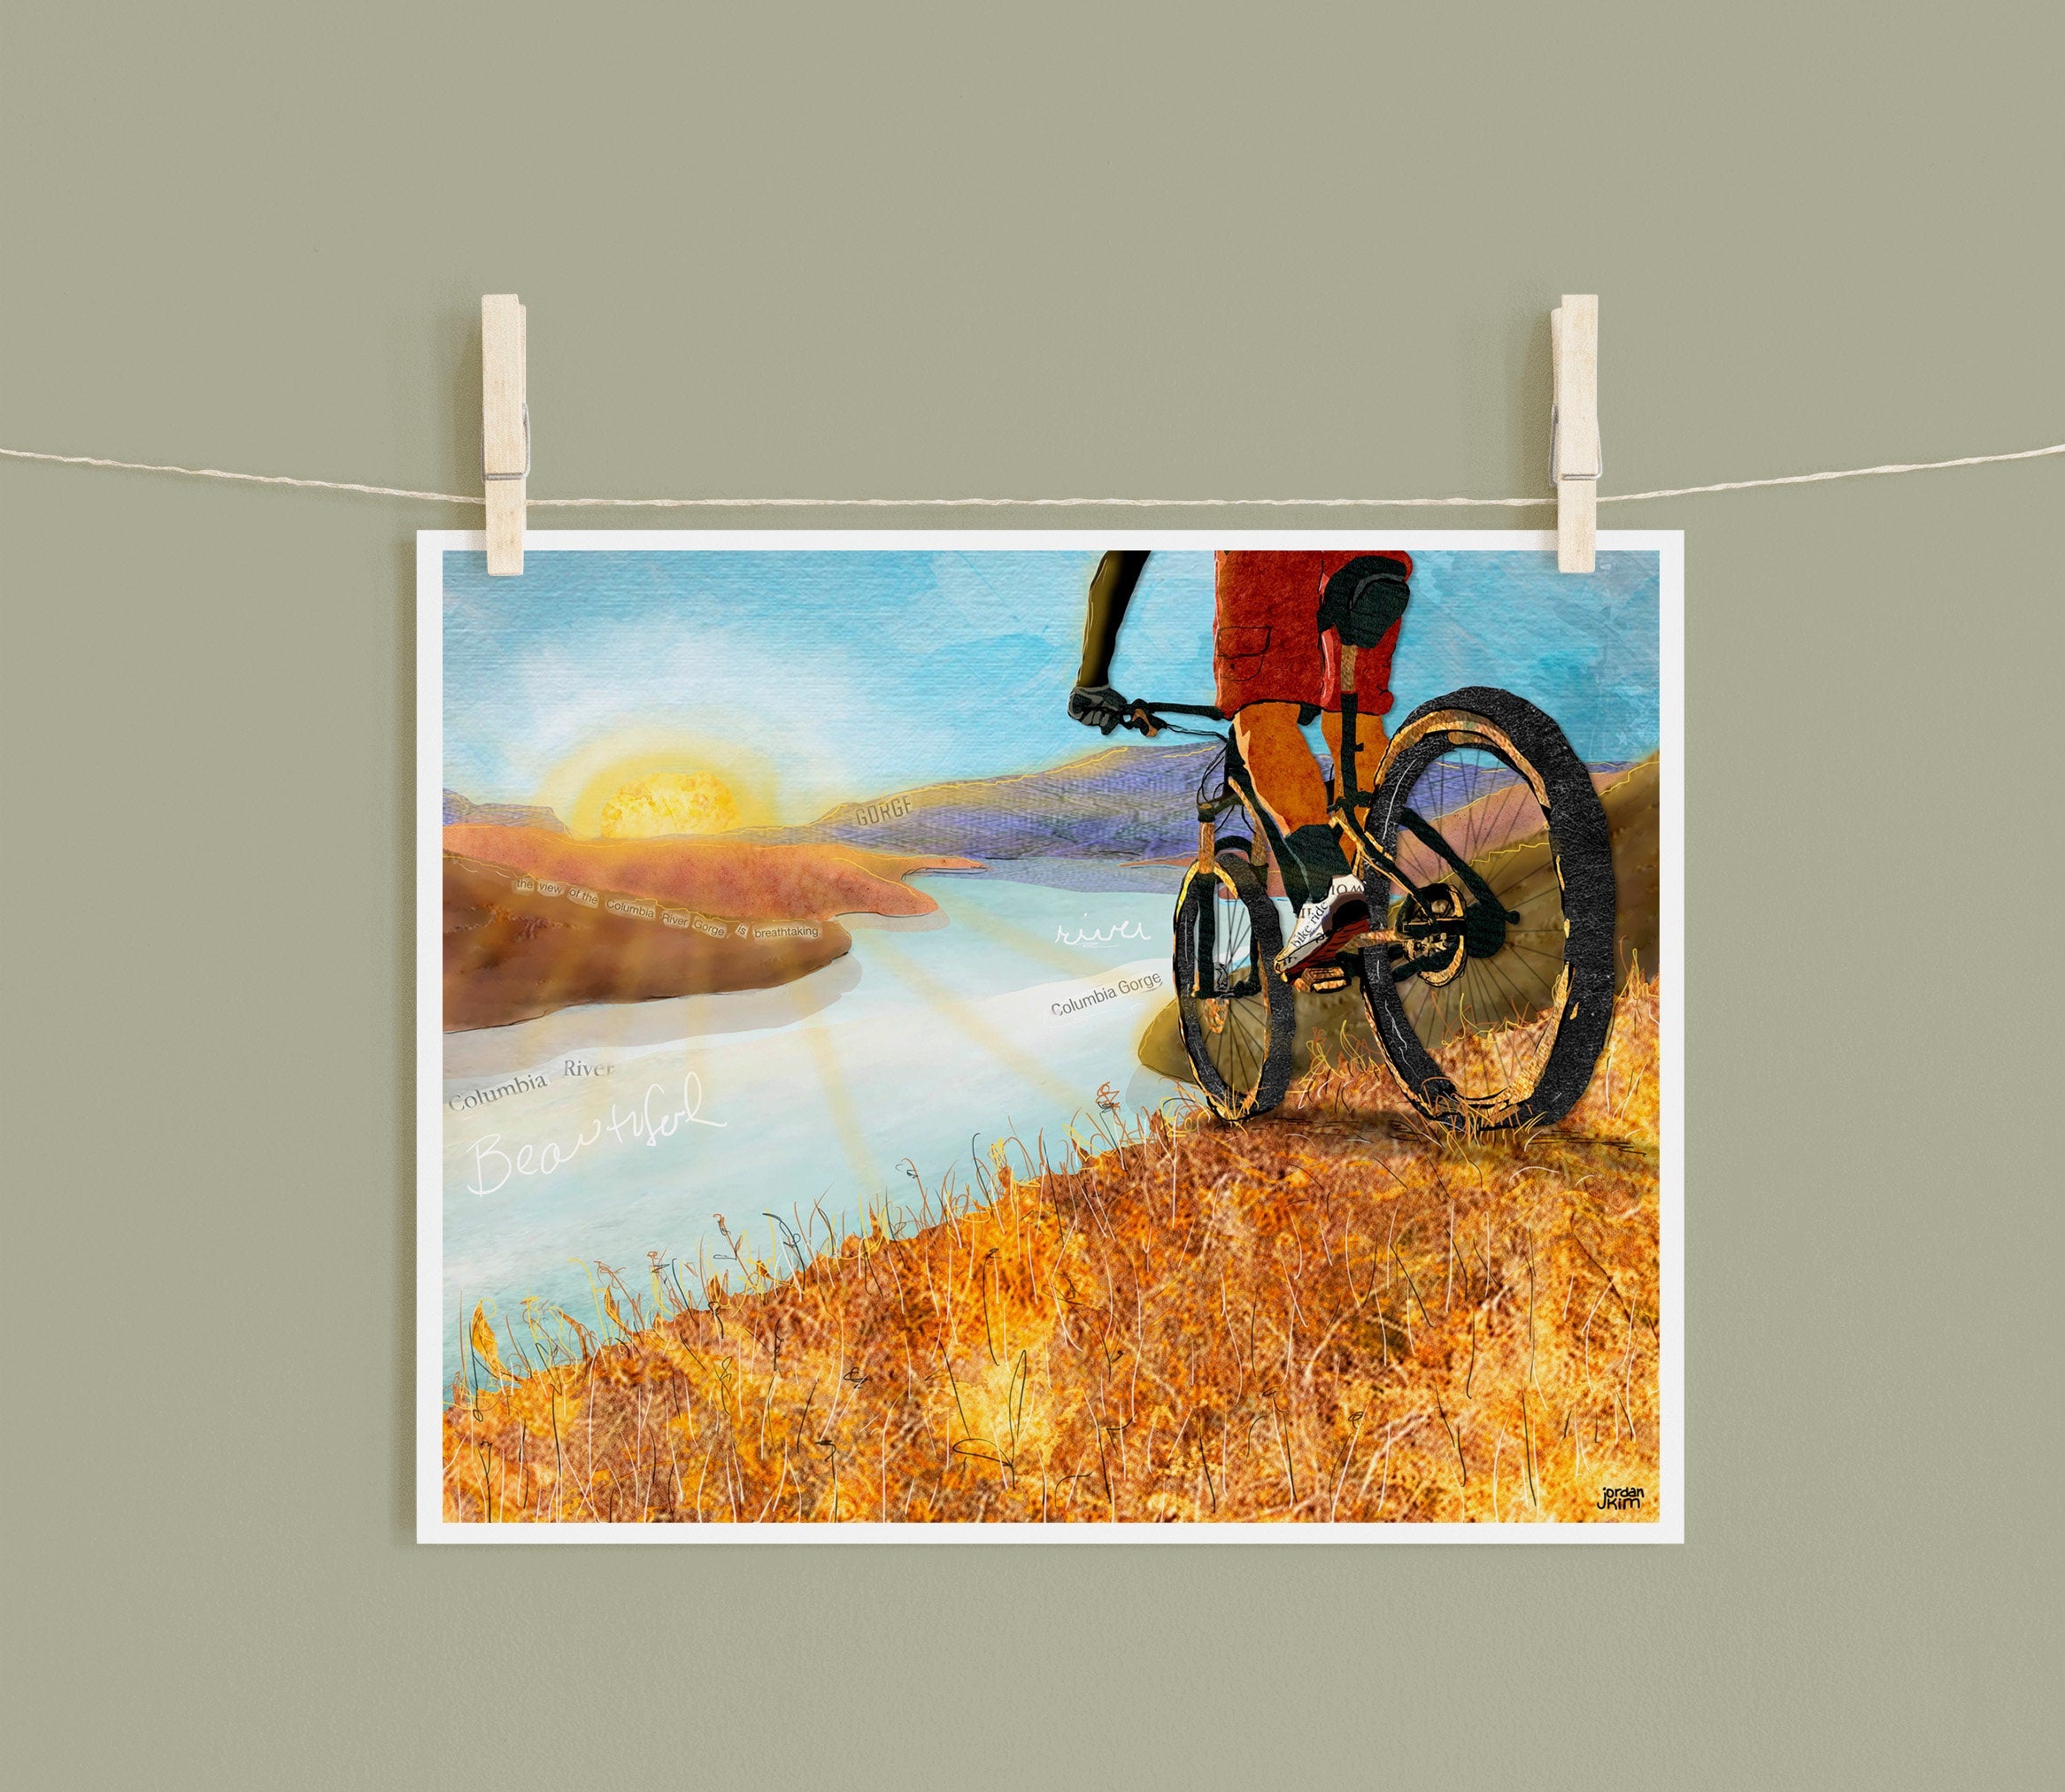 8x10 Art Print of a mixed media collage of a mountain biker looking over the Columbia River Gorge, sunset, vista